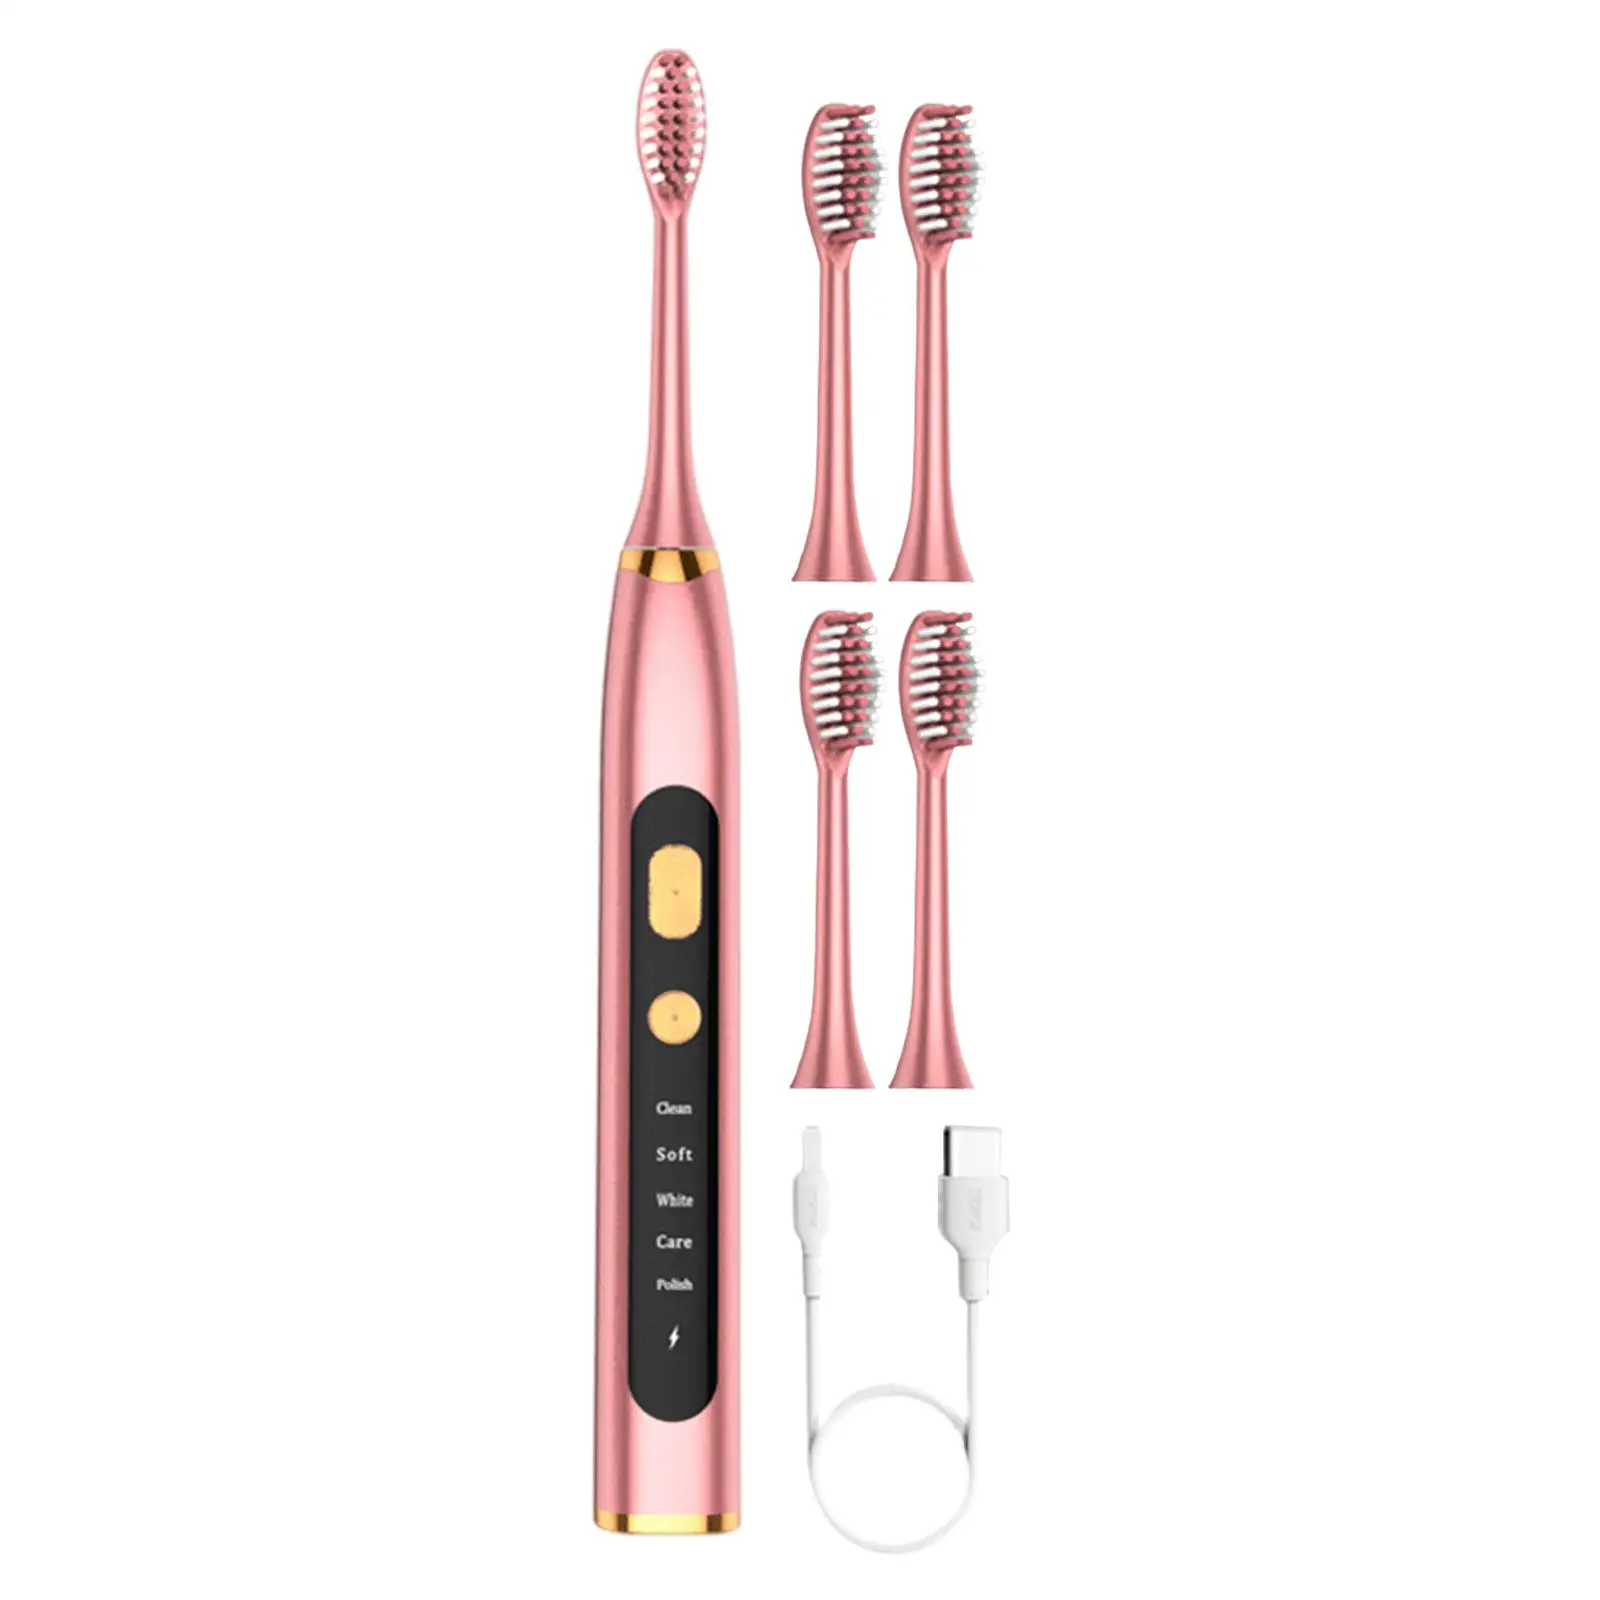 Ultra Whitening Toothbrush with Travel Case 15 Day Using Time for Men Women Smart timers Ultra Sonic Motor